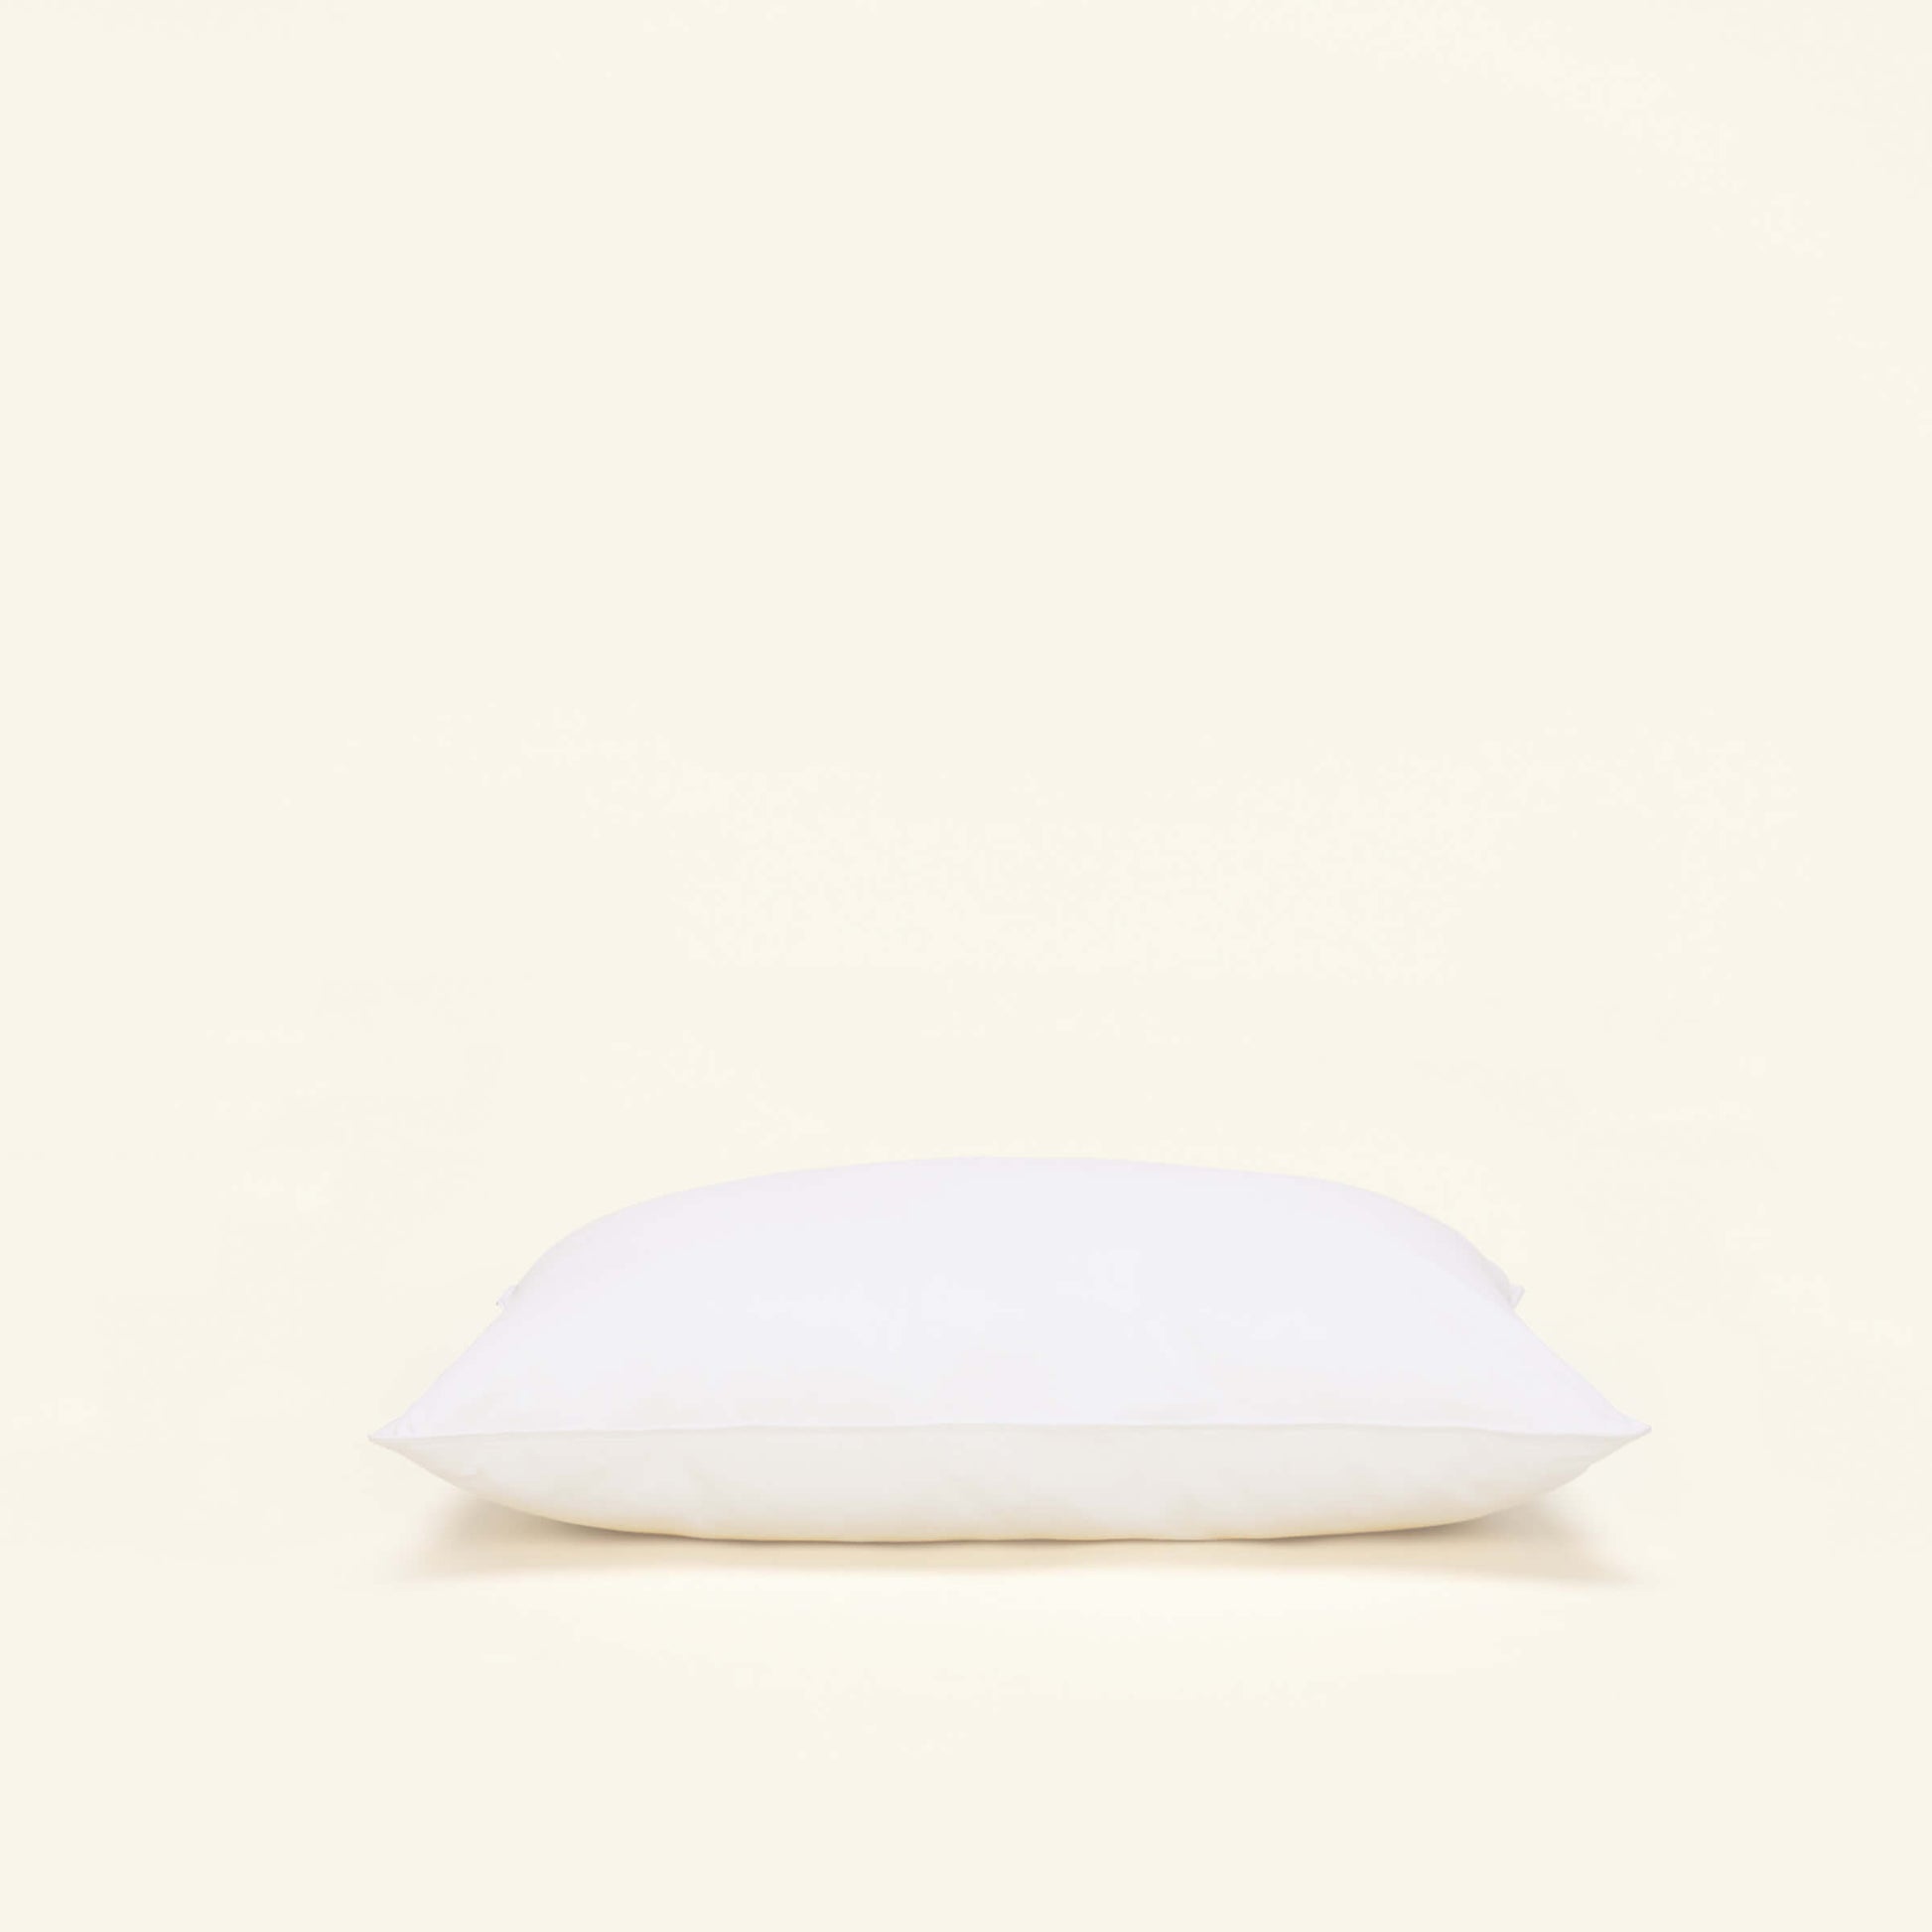 The Slumber Cloud Core Down Alternative Pillow made with temperature regulation technology